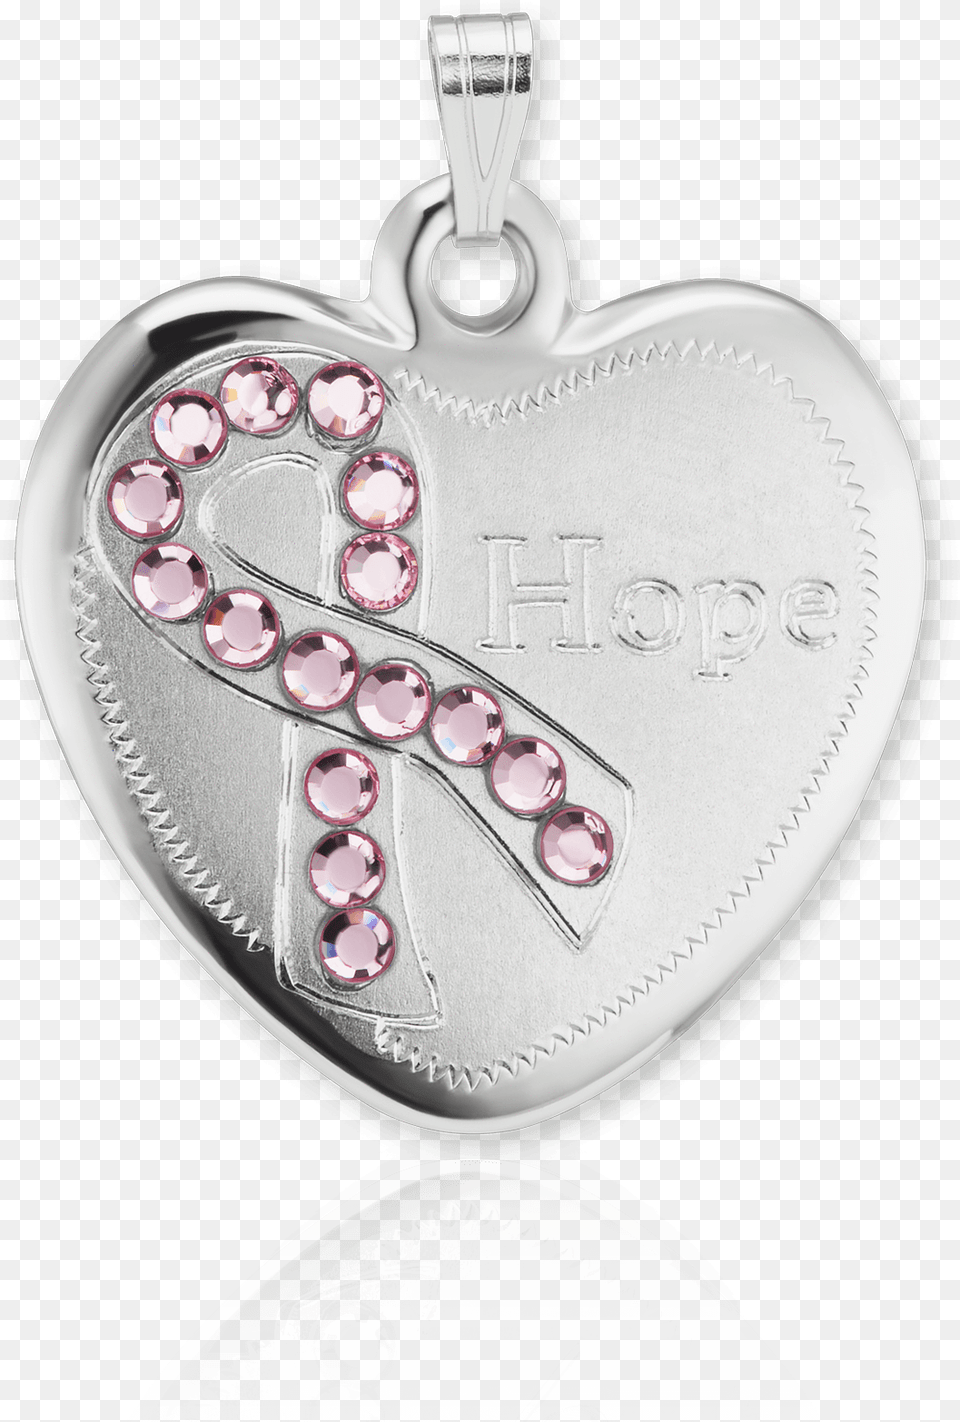 Enameled Sterling Silver Heart Breast Cancer Awareness Locket, Accessories, Jewelry, Pendant Png Image